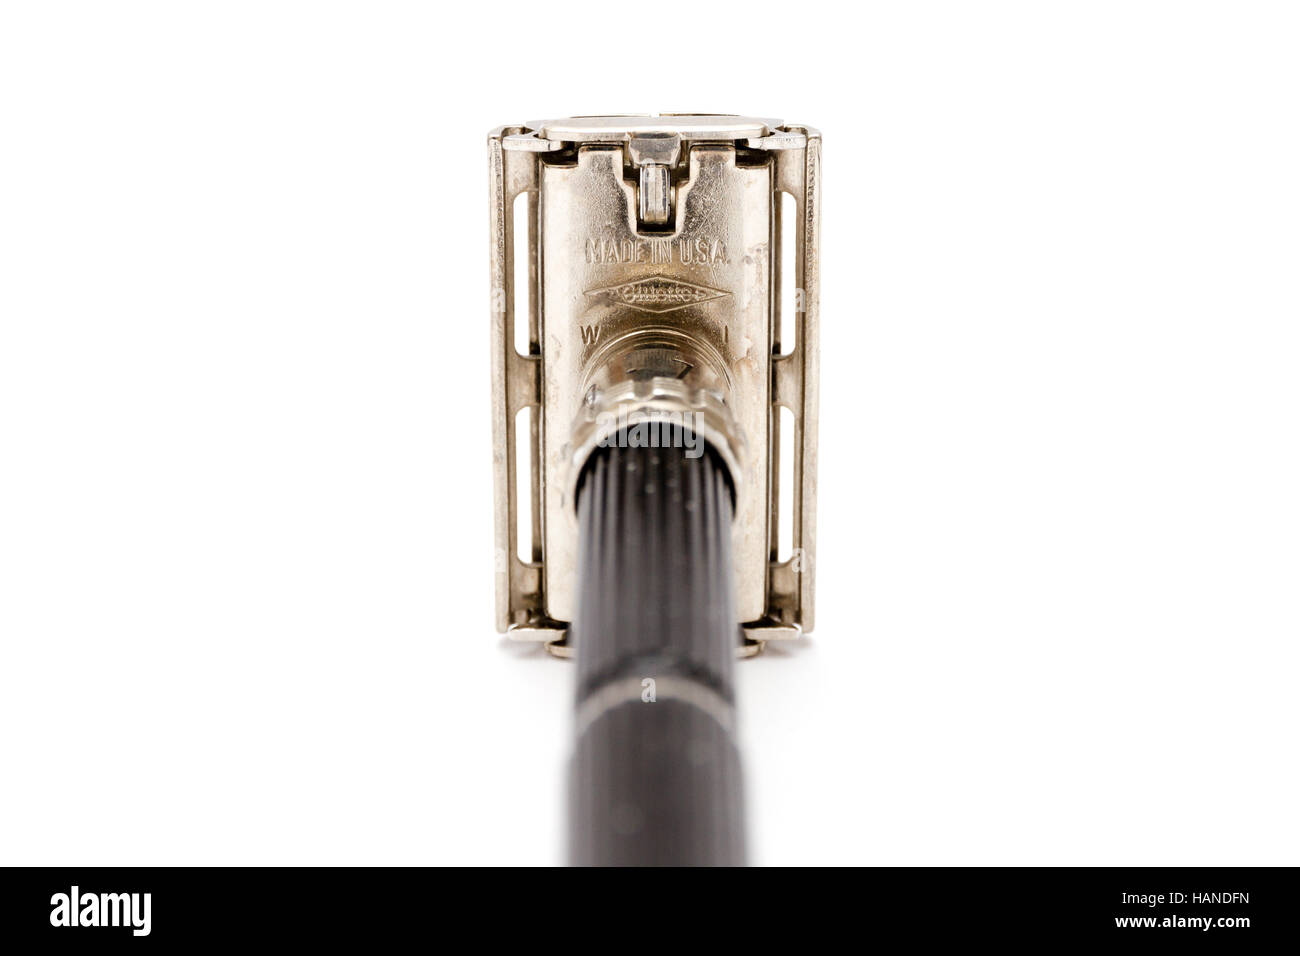 Rome, Italy - August 10, 2015: Traditional double edge safety razor on display Stock Photo